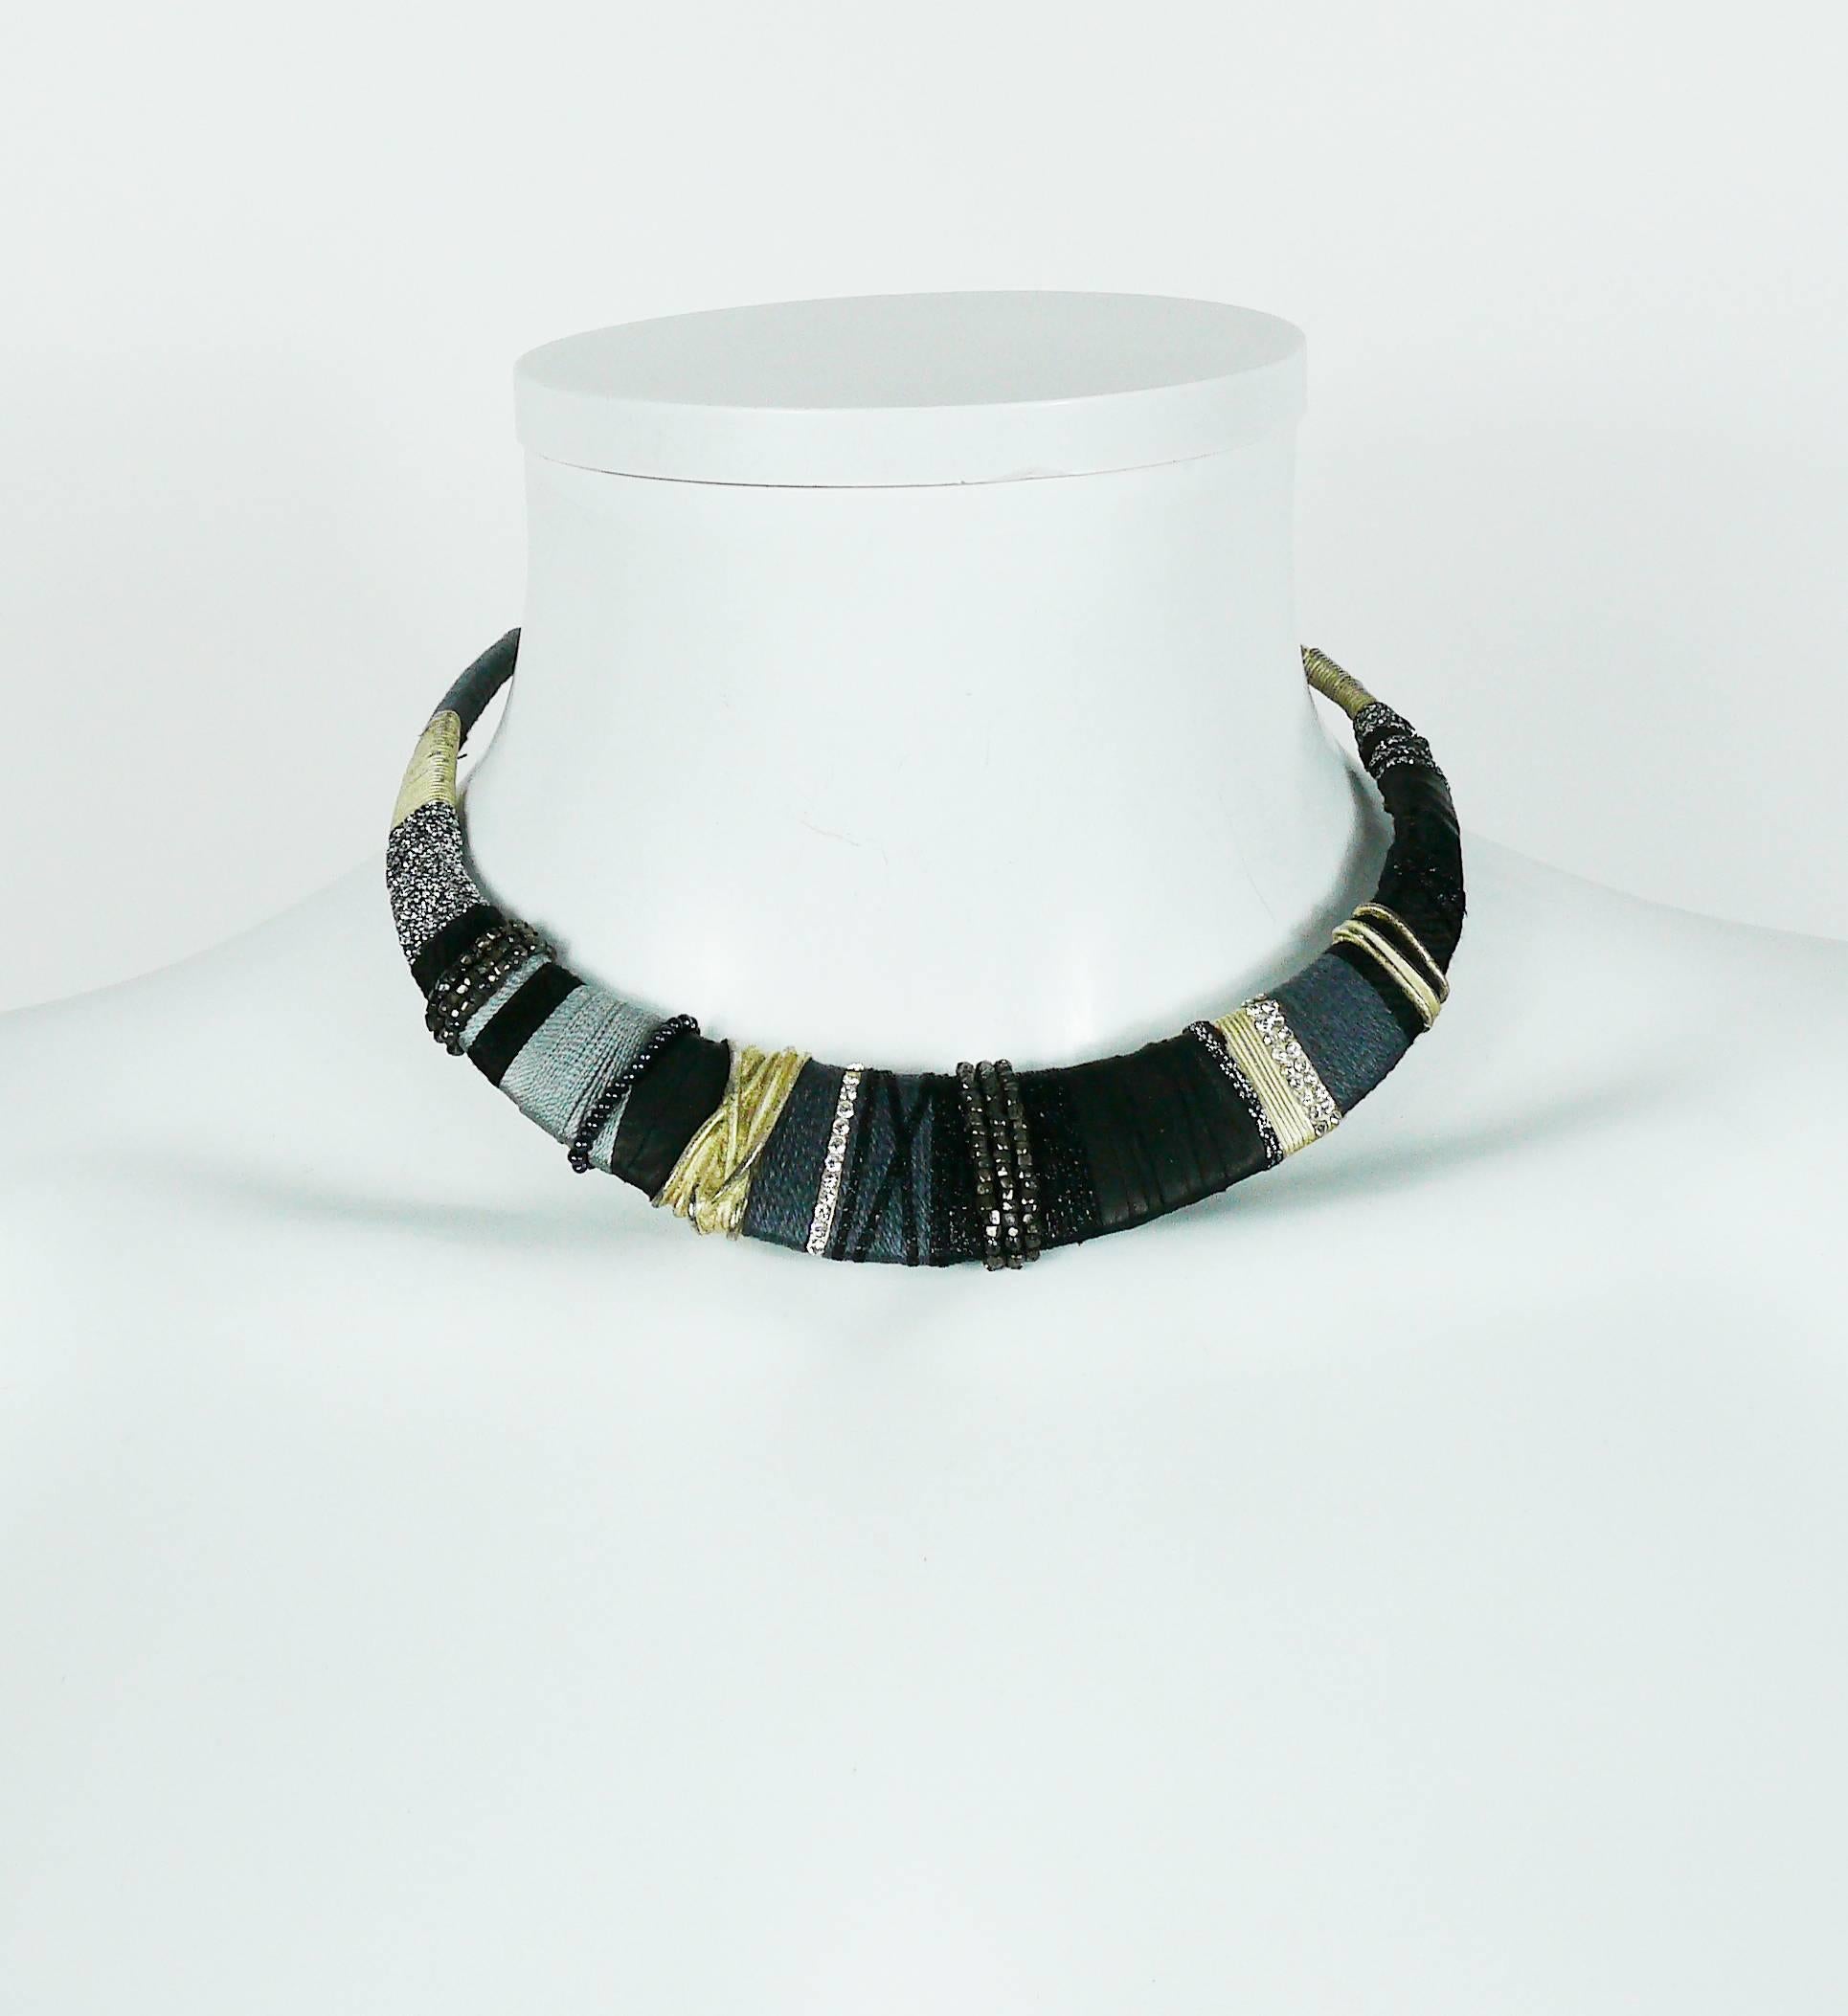 CHRISTIAN LACROIX vintage Masai inspired silver toned rigid choker necklace embellished with grey and black pearls, fabrics, black leather and clear crystals.

Hook clasp.

Marked CHRISTIAN LACROIX CL Made in France.

Indicative measurements : inner